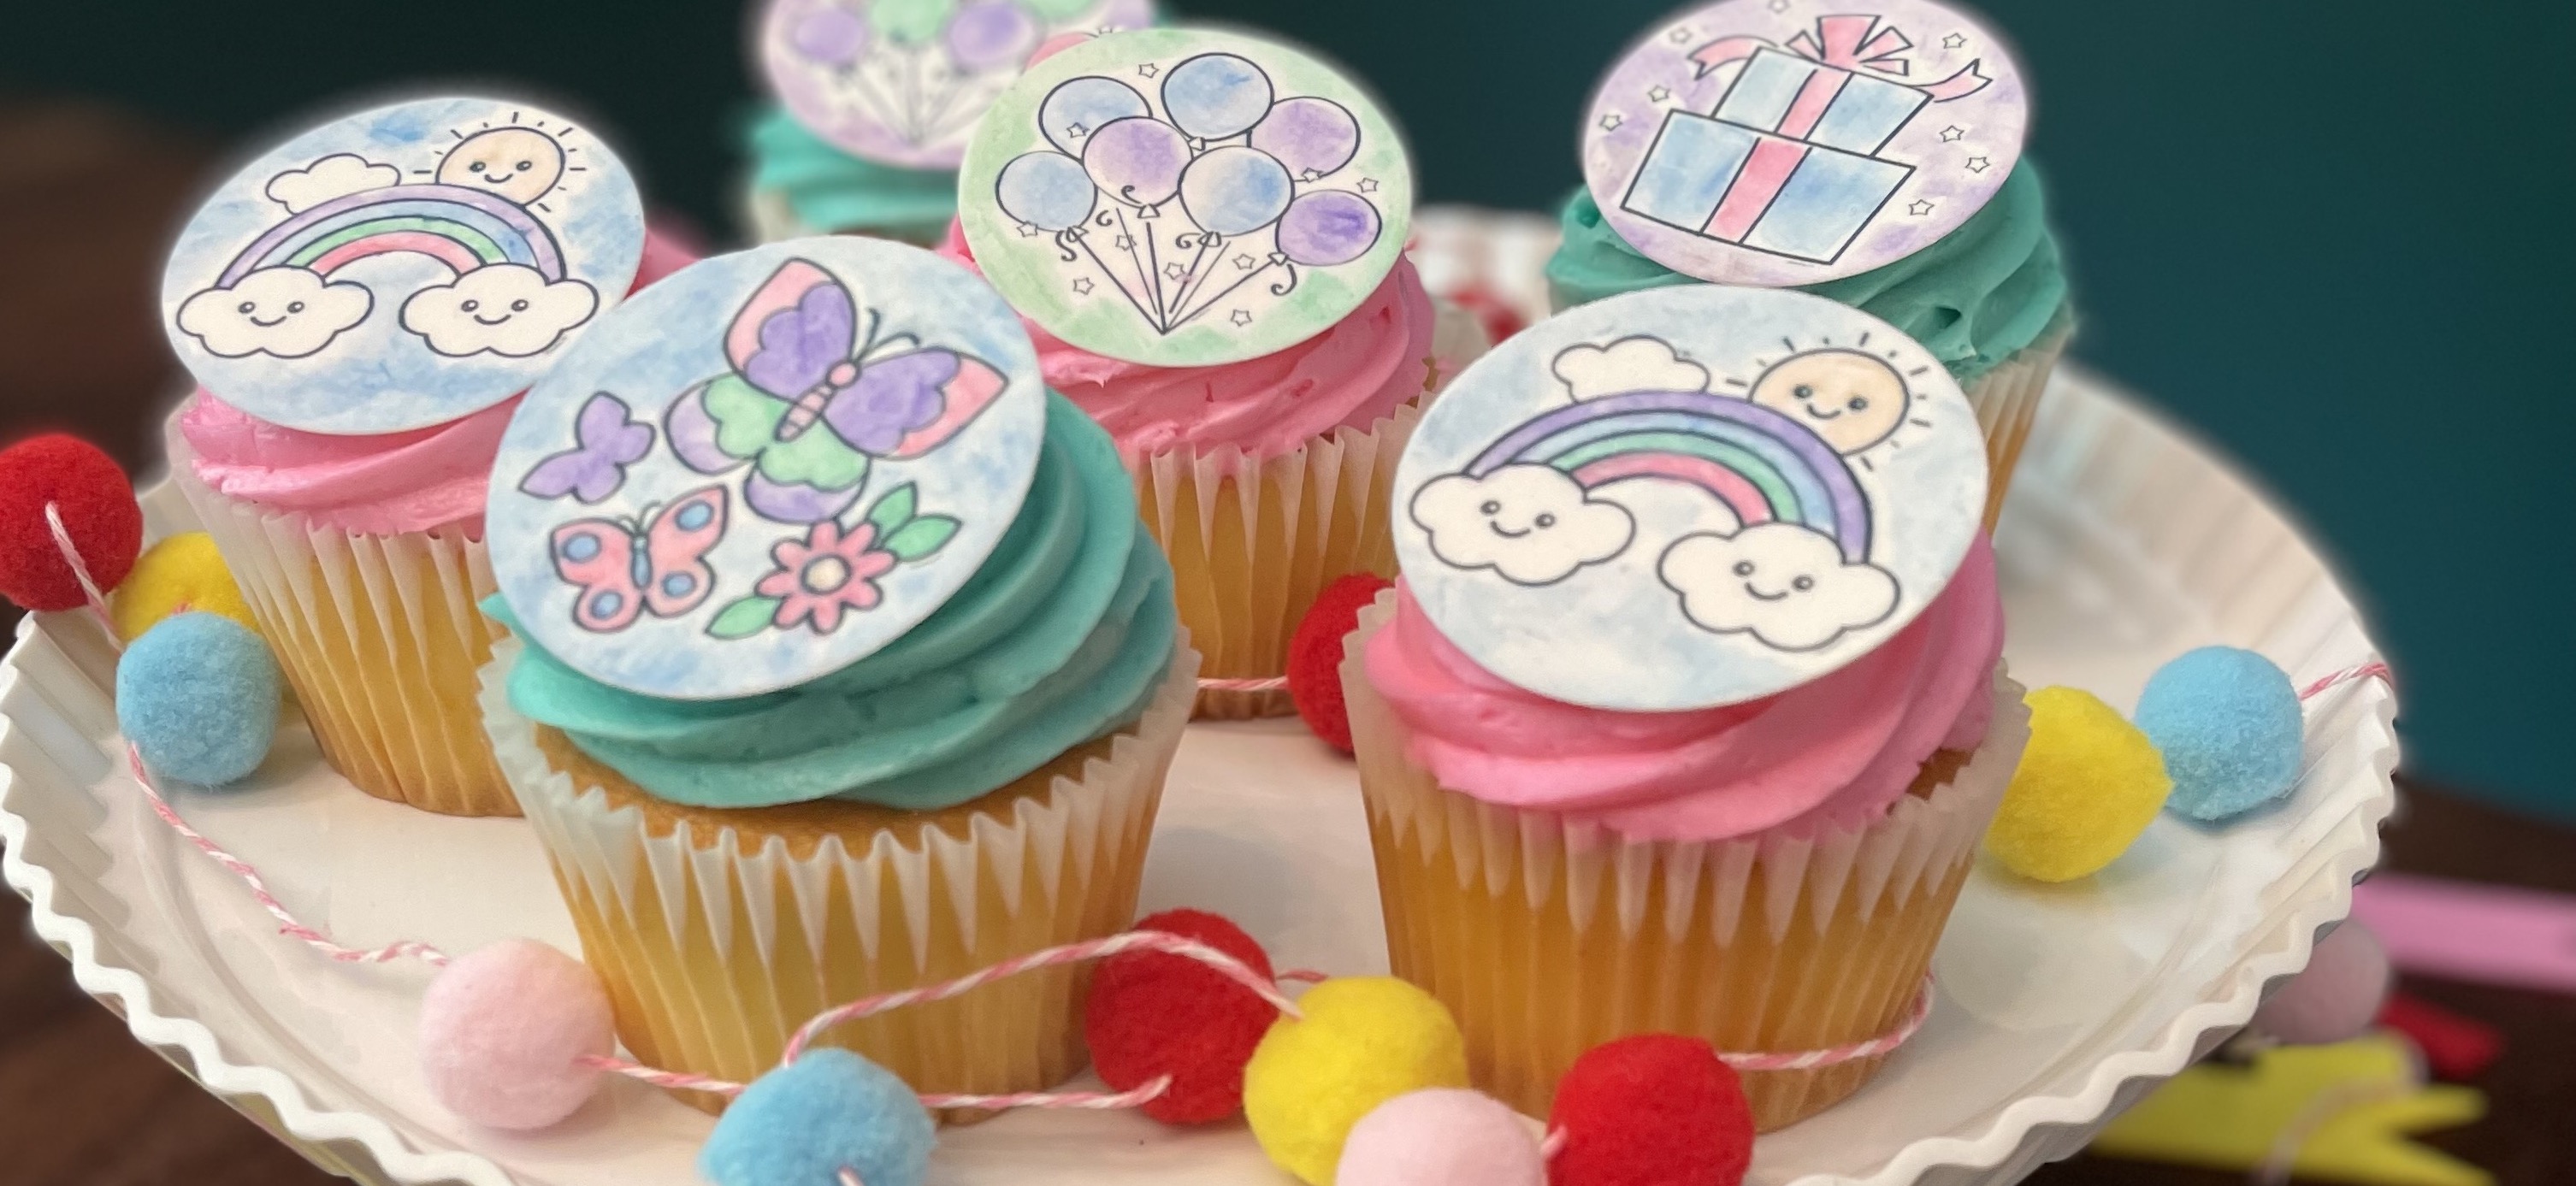 PYO kits paint your own kits on cupcakes. Butterfly and rainbow designs with paint your own paint palettes and paint brush